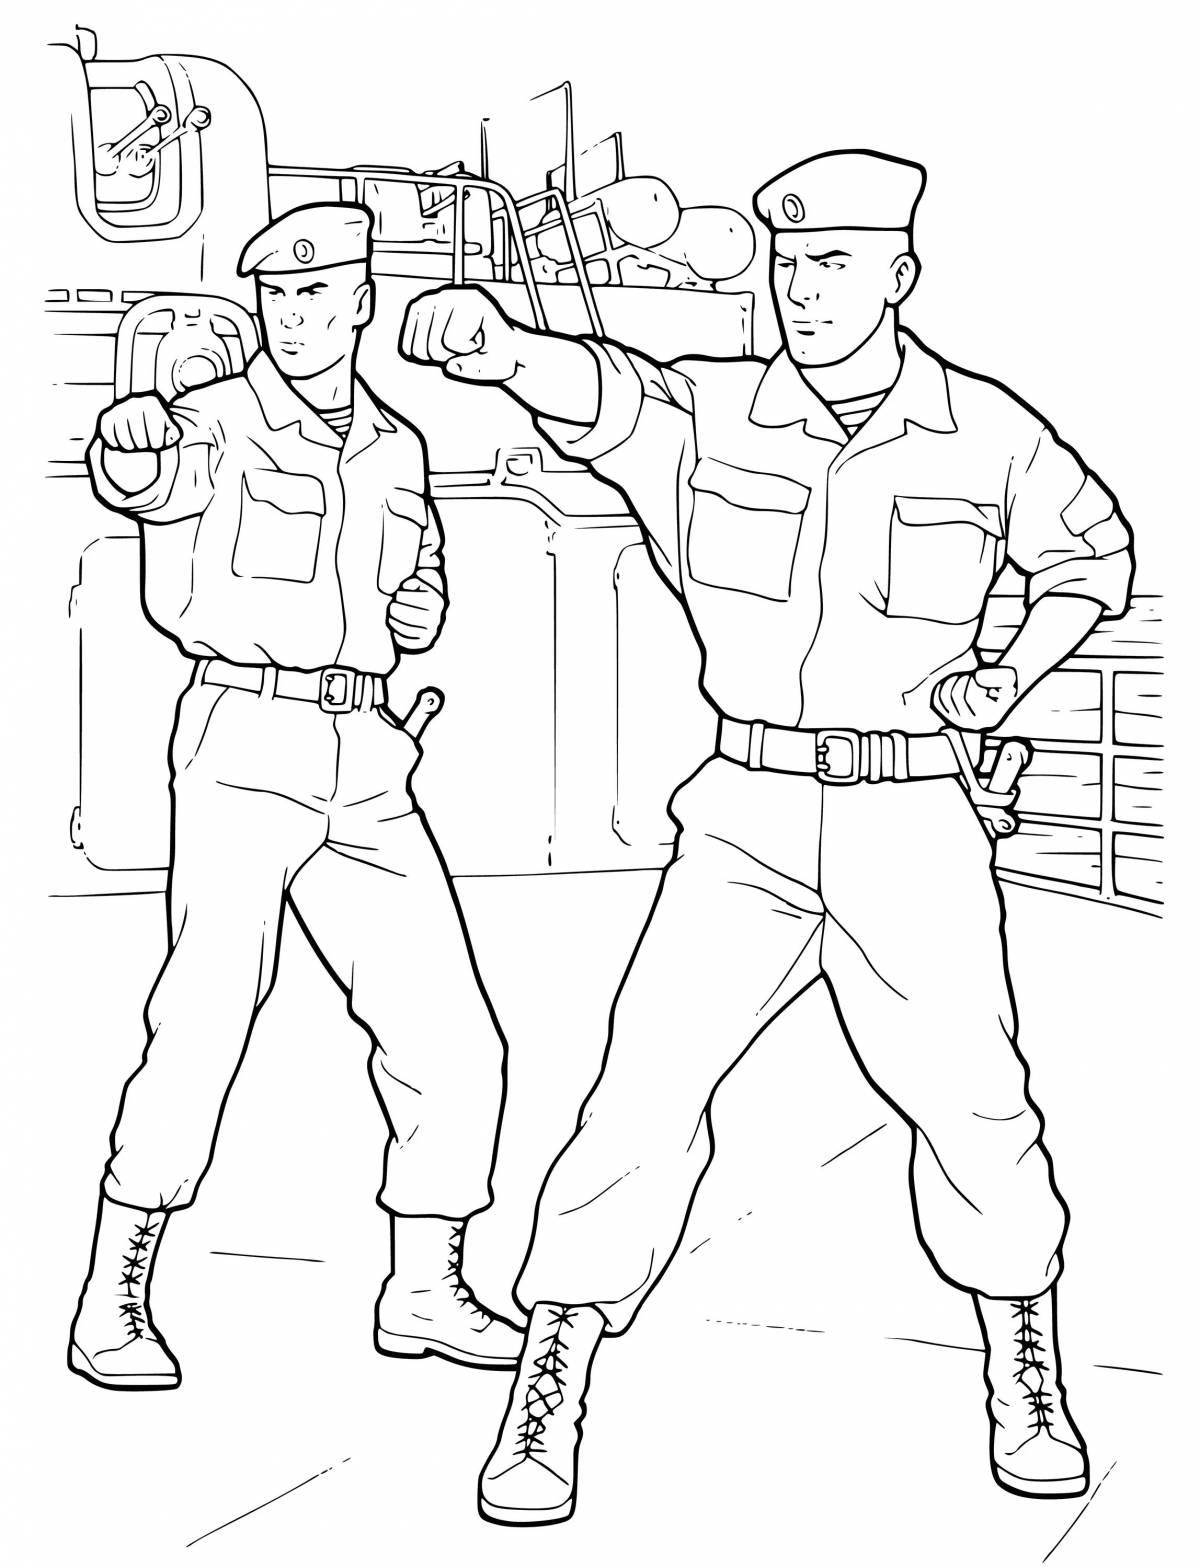 Coloring book famous Russian soldier